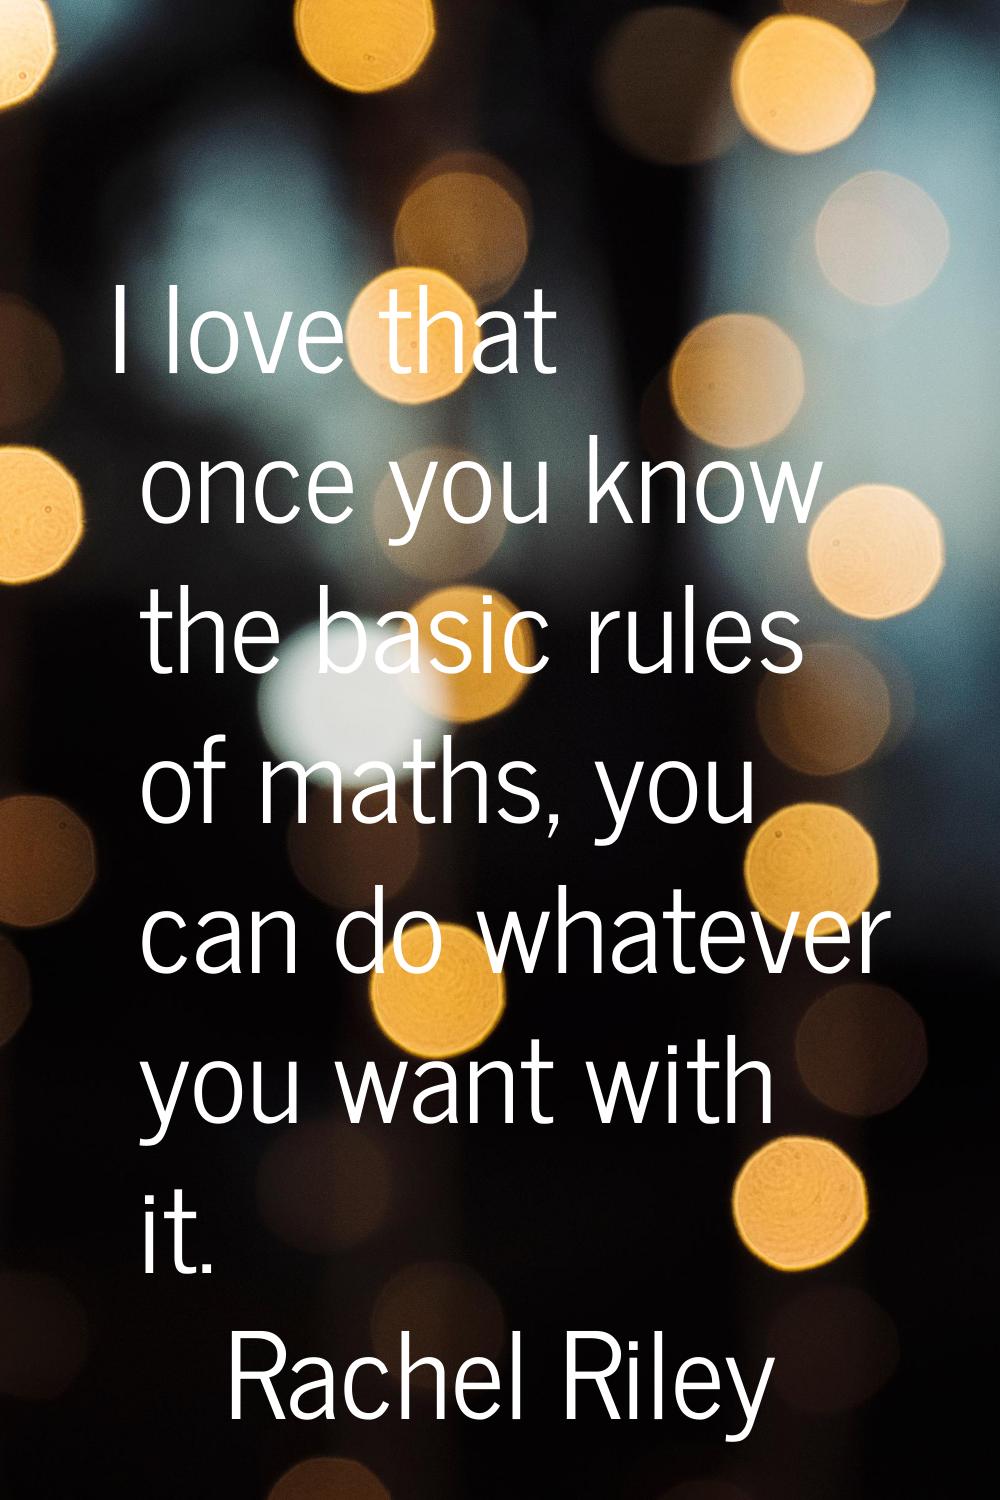 I love that once you know the basic rules of maths, you can do whatever you want with it.